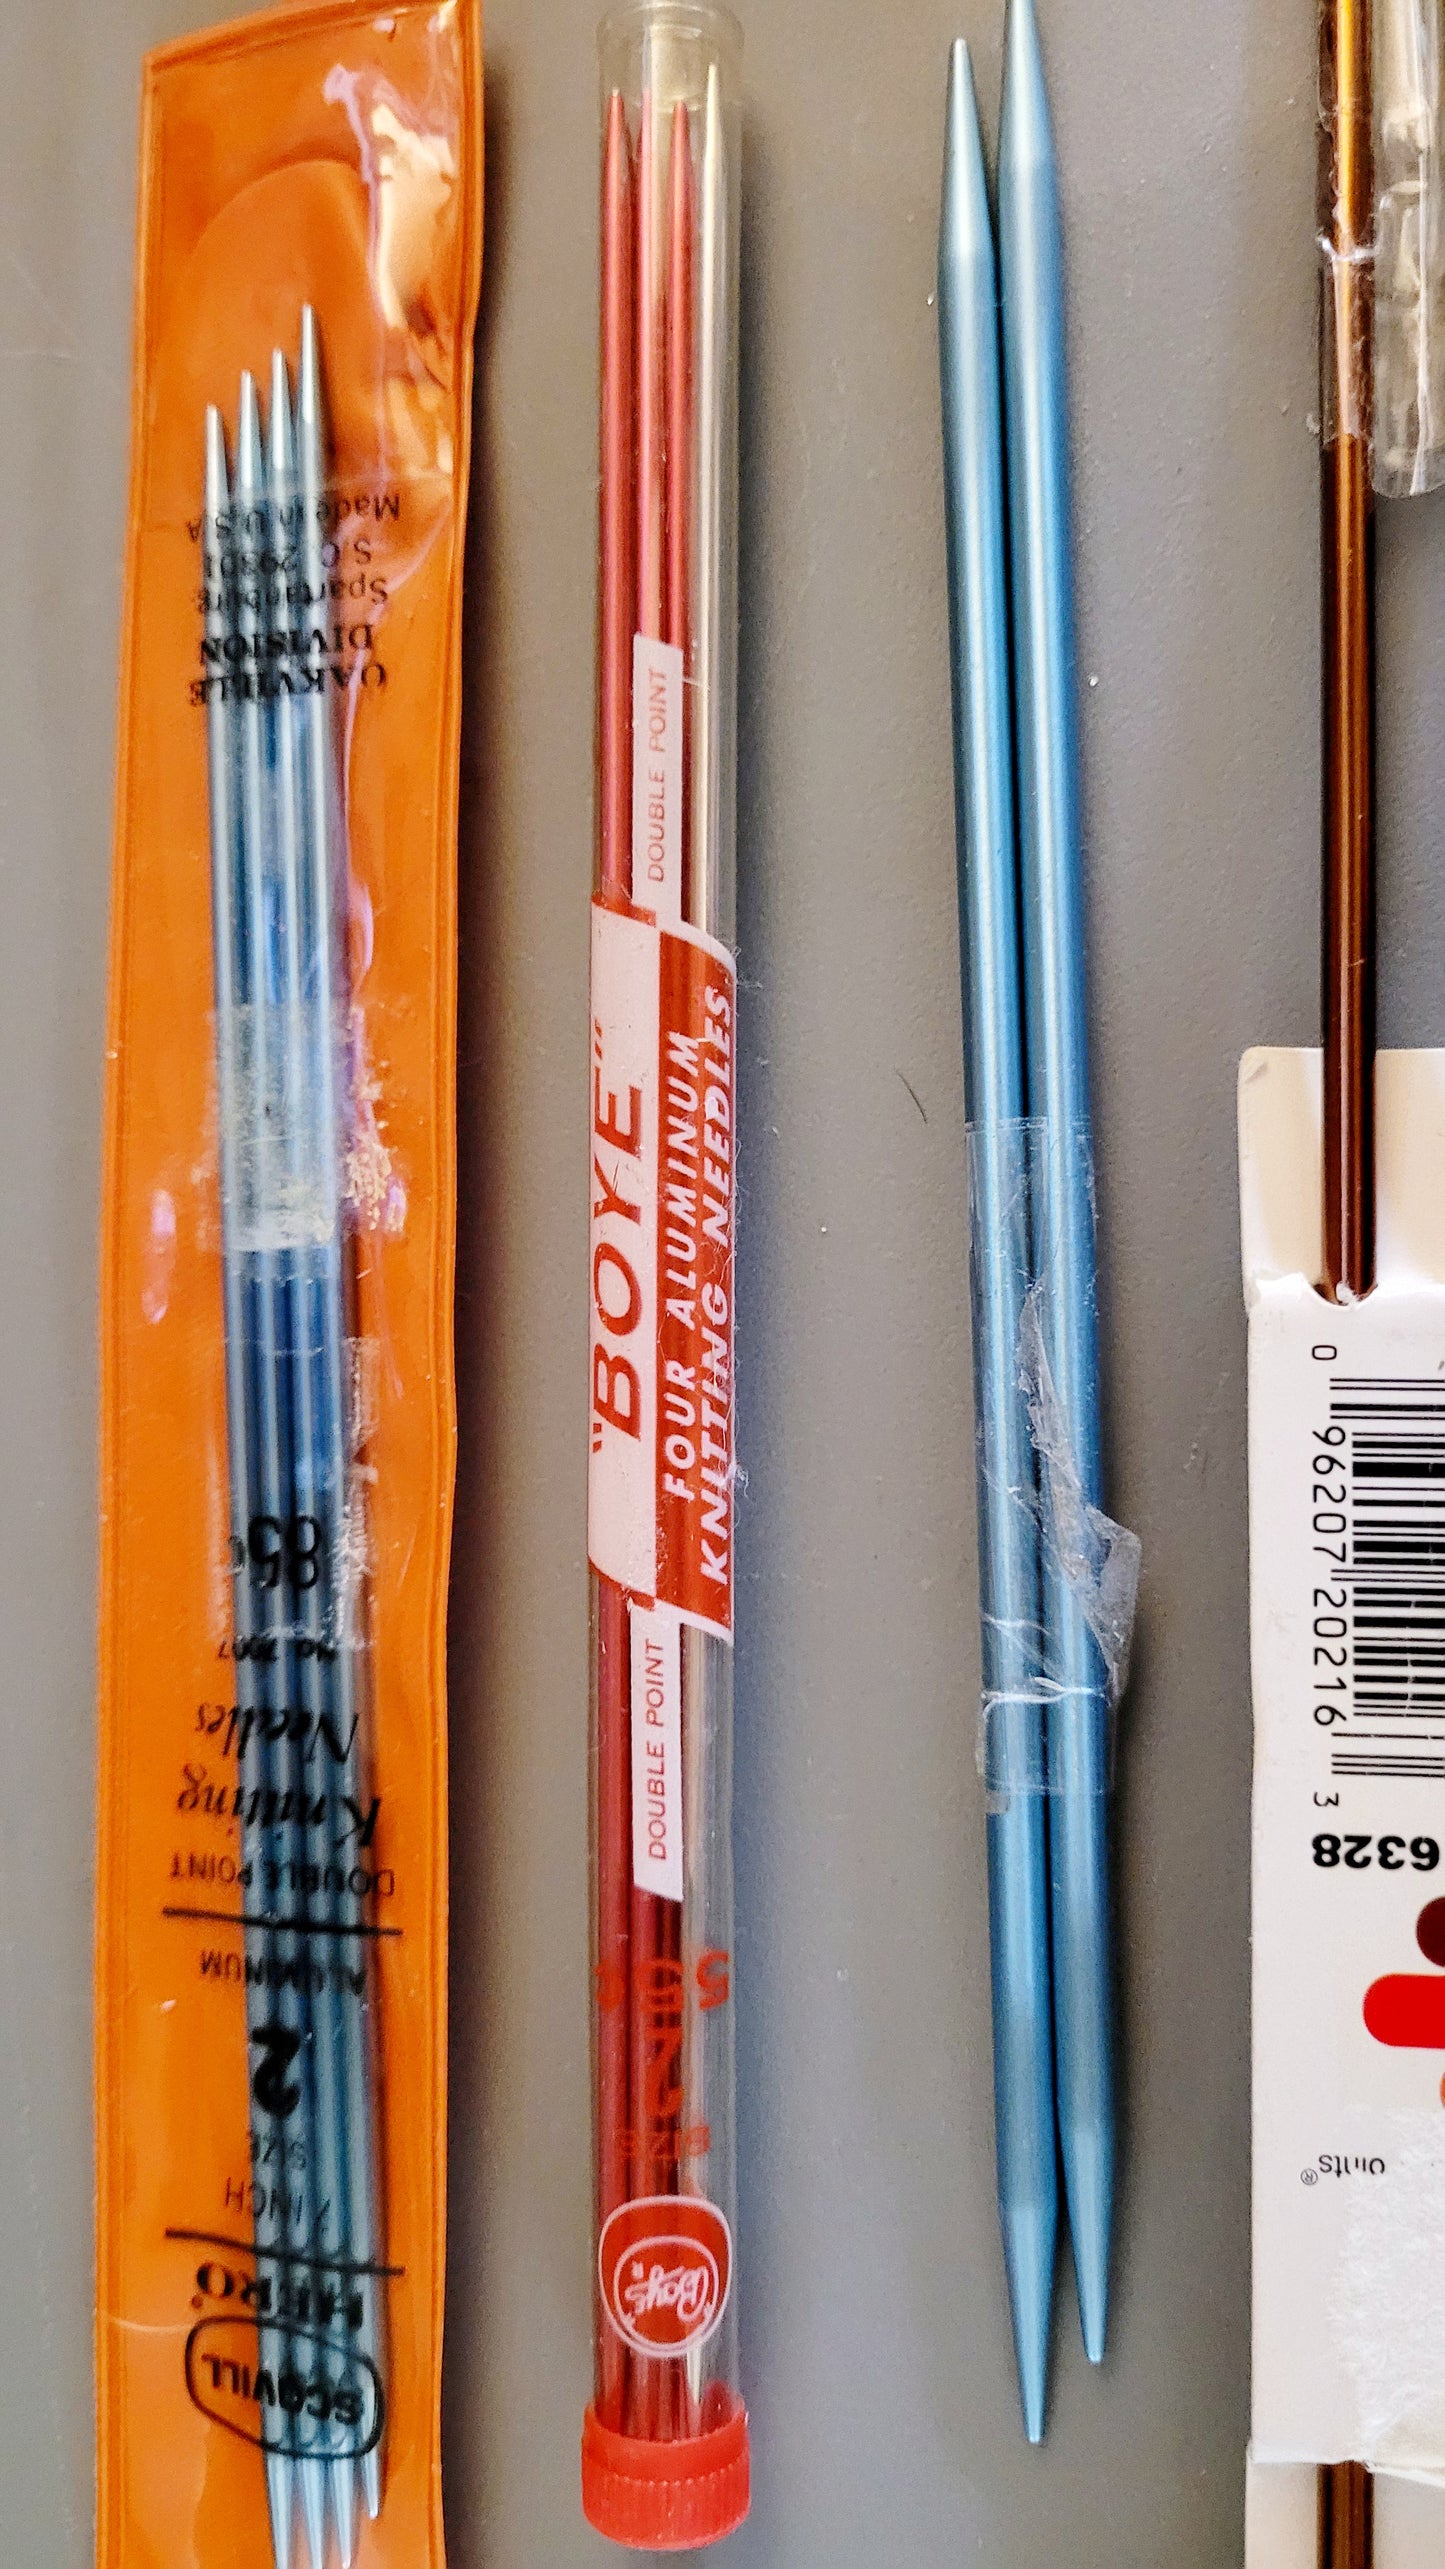 New *Lots of Knitting Needles (metal)/All Sizes & Lengths